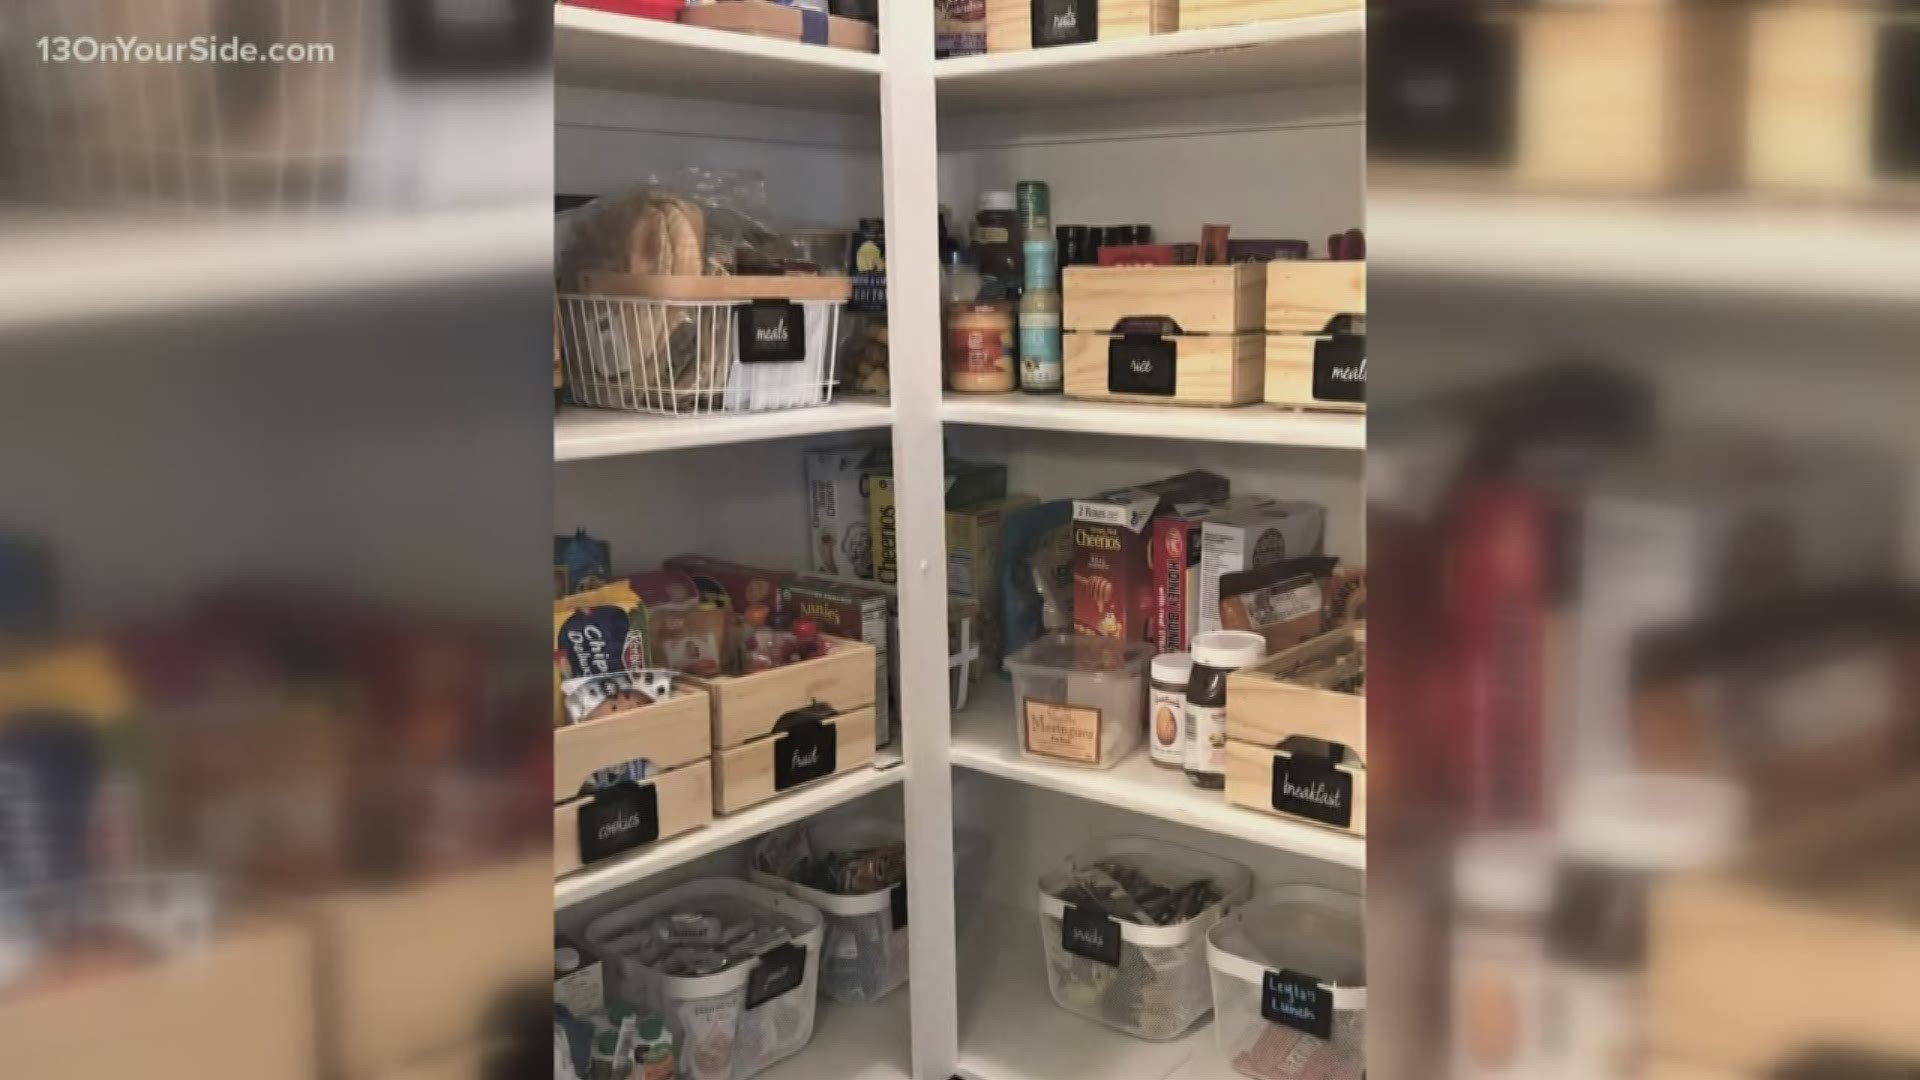 See ways to get organized when it comes to your pantry.